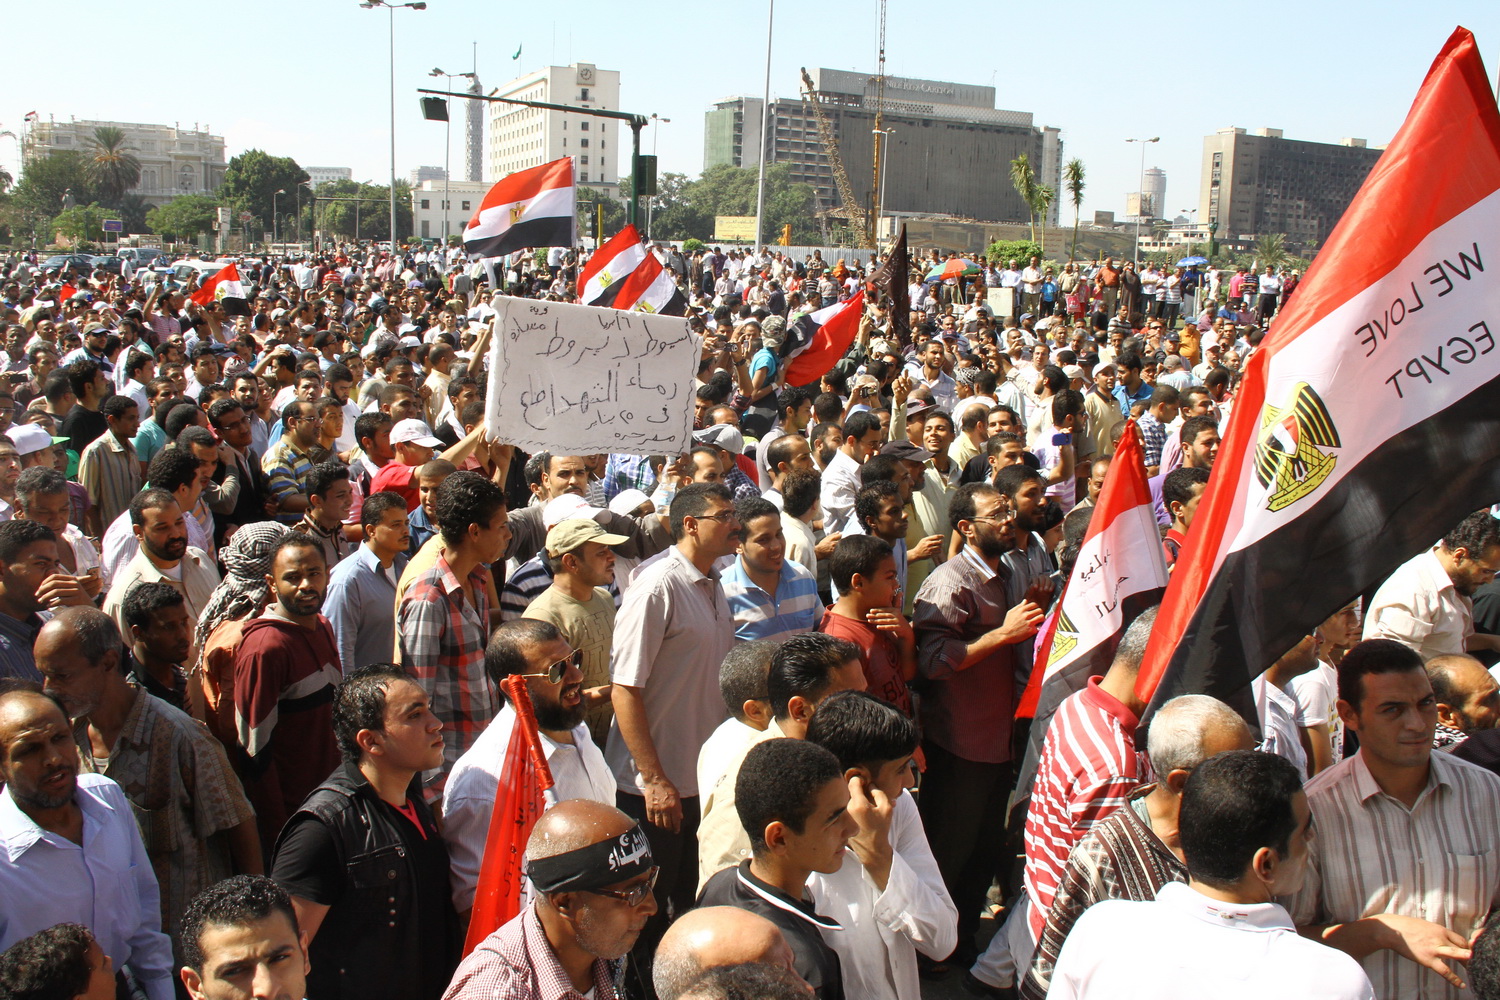 Supporters of Muslim Brotherhood occupy Tahrir Square last Friday, overshadowing the civil group protest and leading to clashes. Civil groups have called for fresh demonstrations this Friday. (Photo by Mohamed Omar)